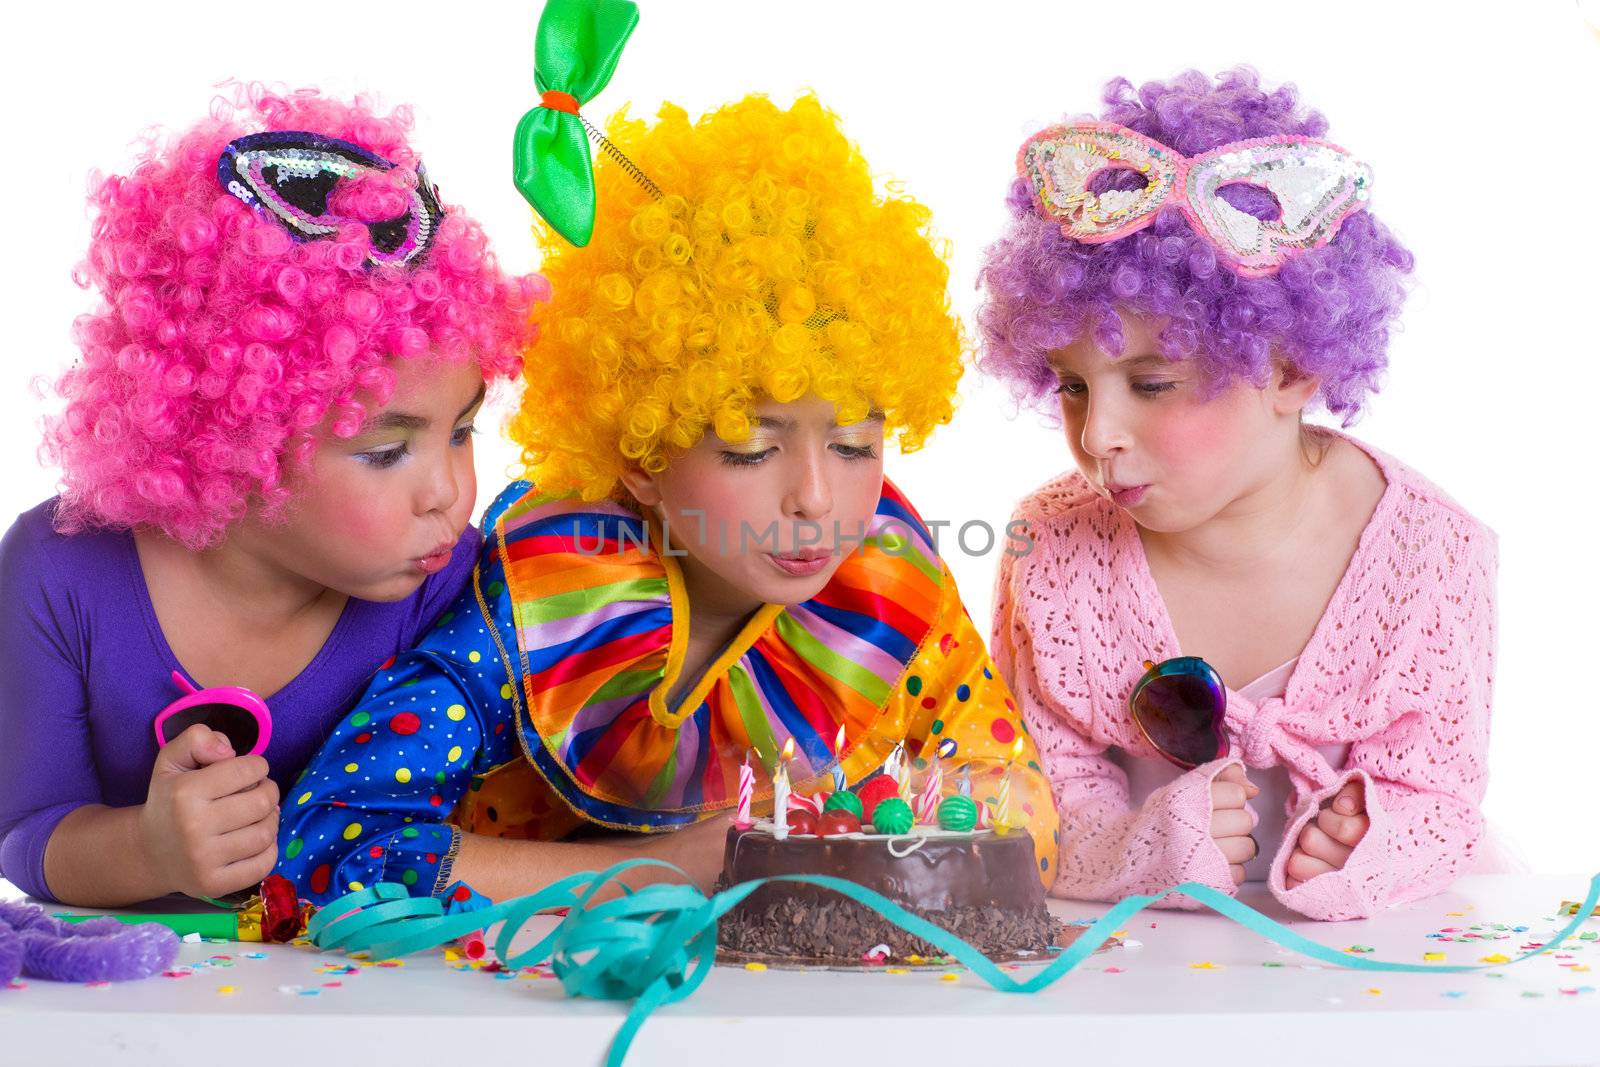 Children birthday party clown wigs blowing cake candles by lunamarina